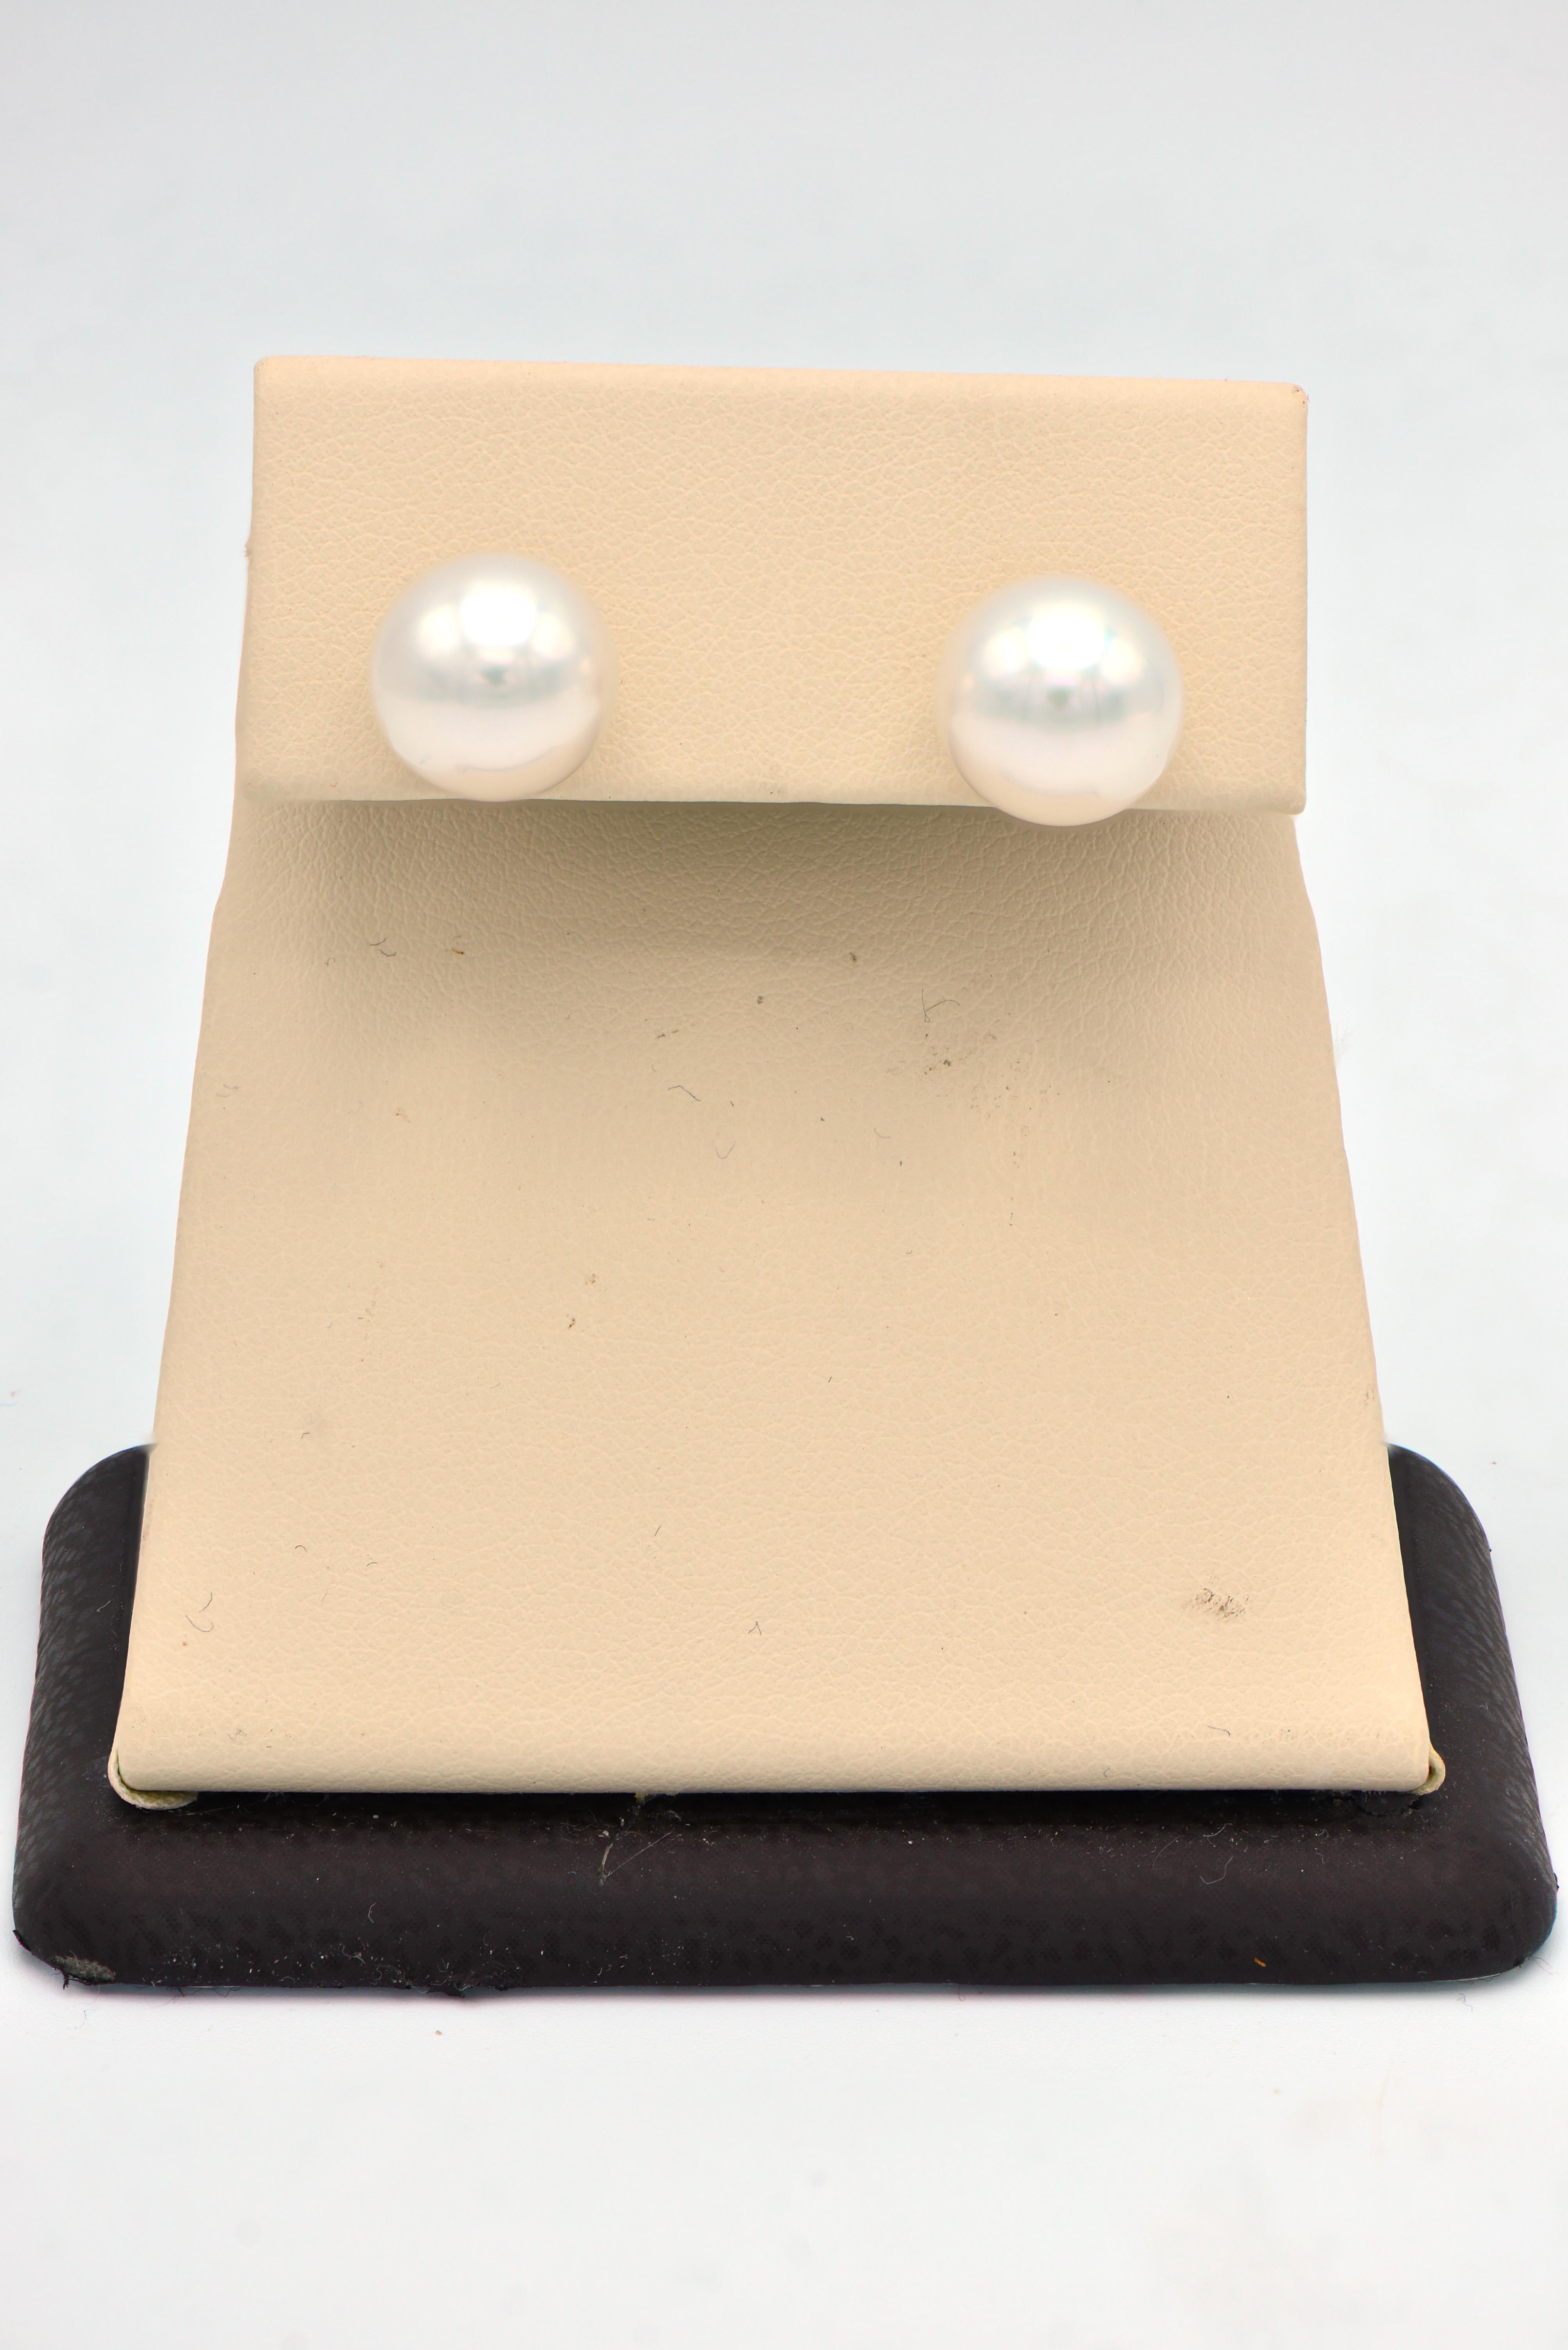 Contemporary 9.5-10mm South Sea Pearl Stud Earrings with 14 Karat White Gold Post and Back